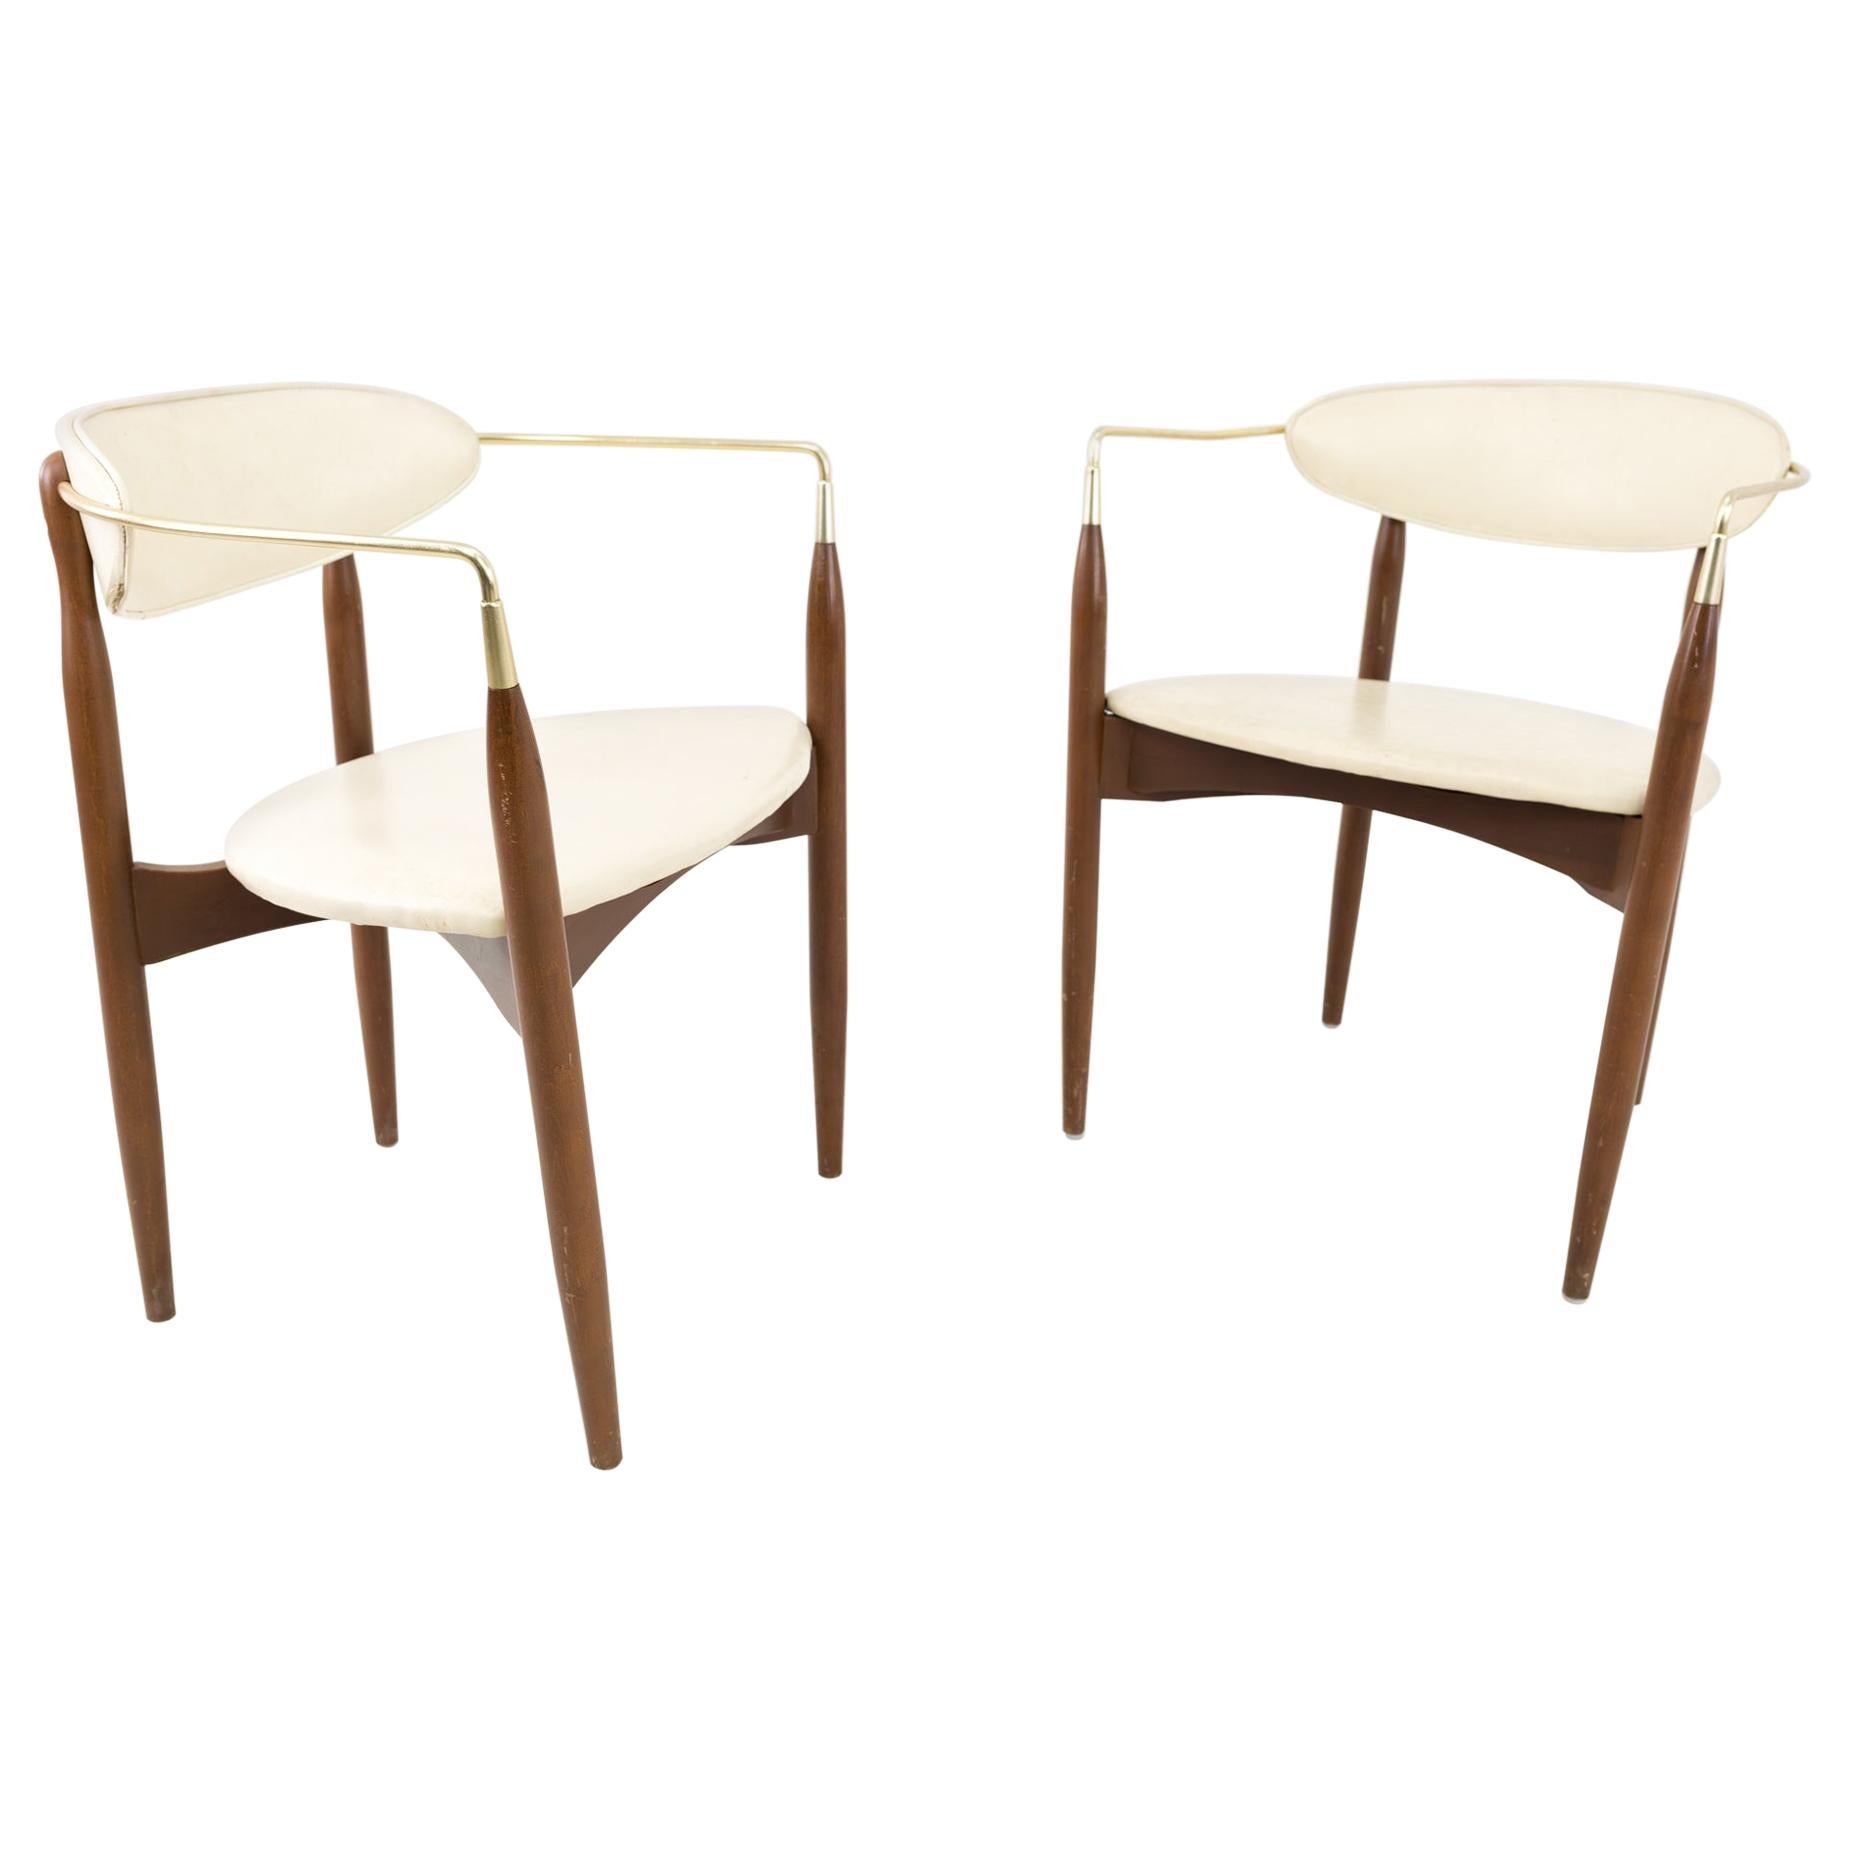 Dan Johnson for Selig Viscount Midcentury Walnut and Brass Dining Chairs, Pair